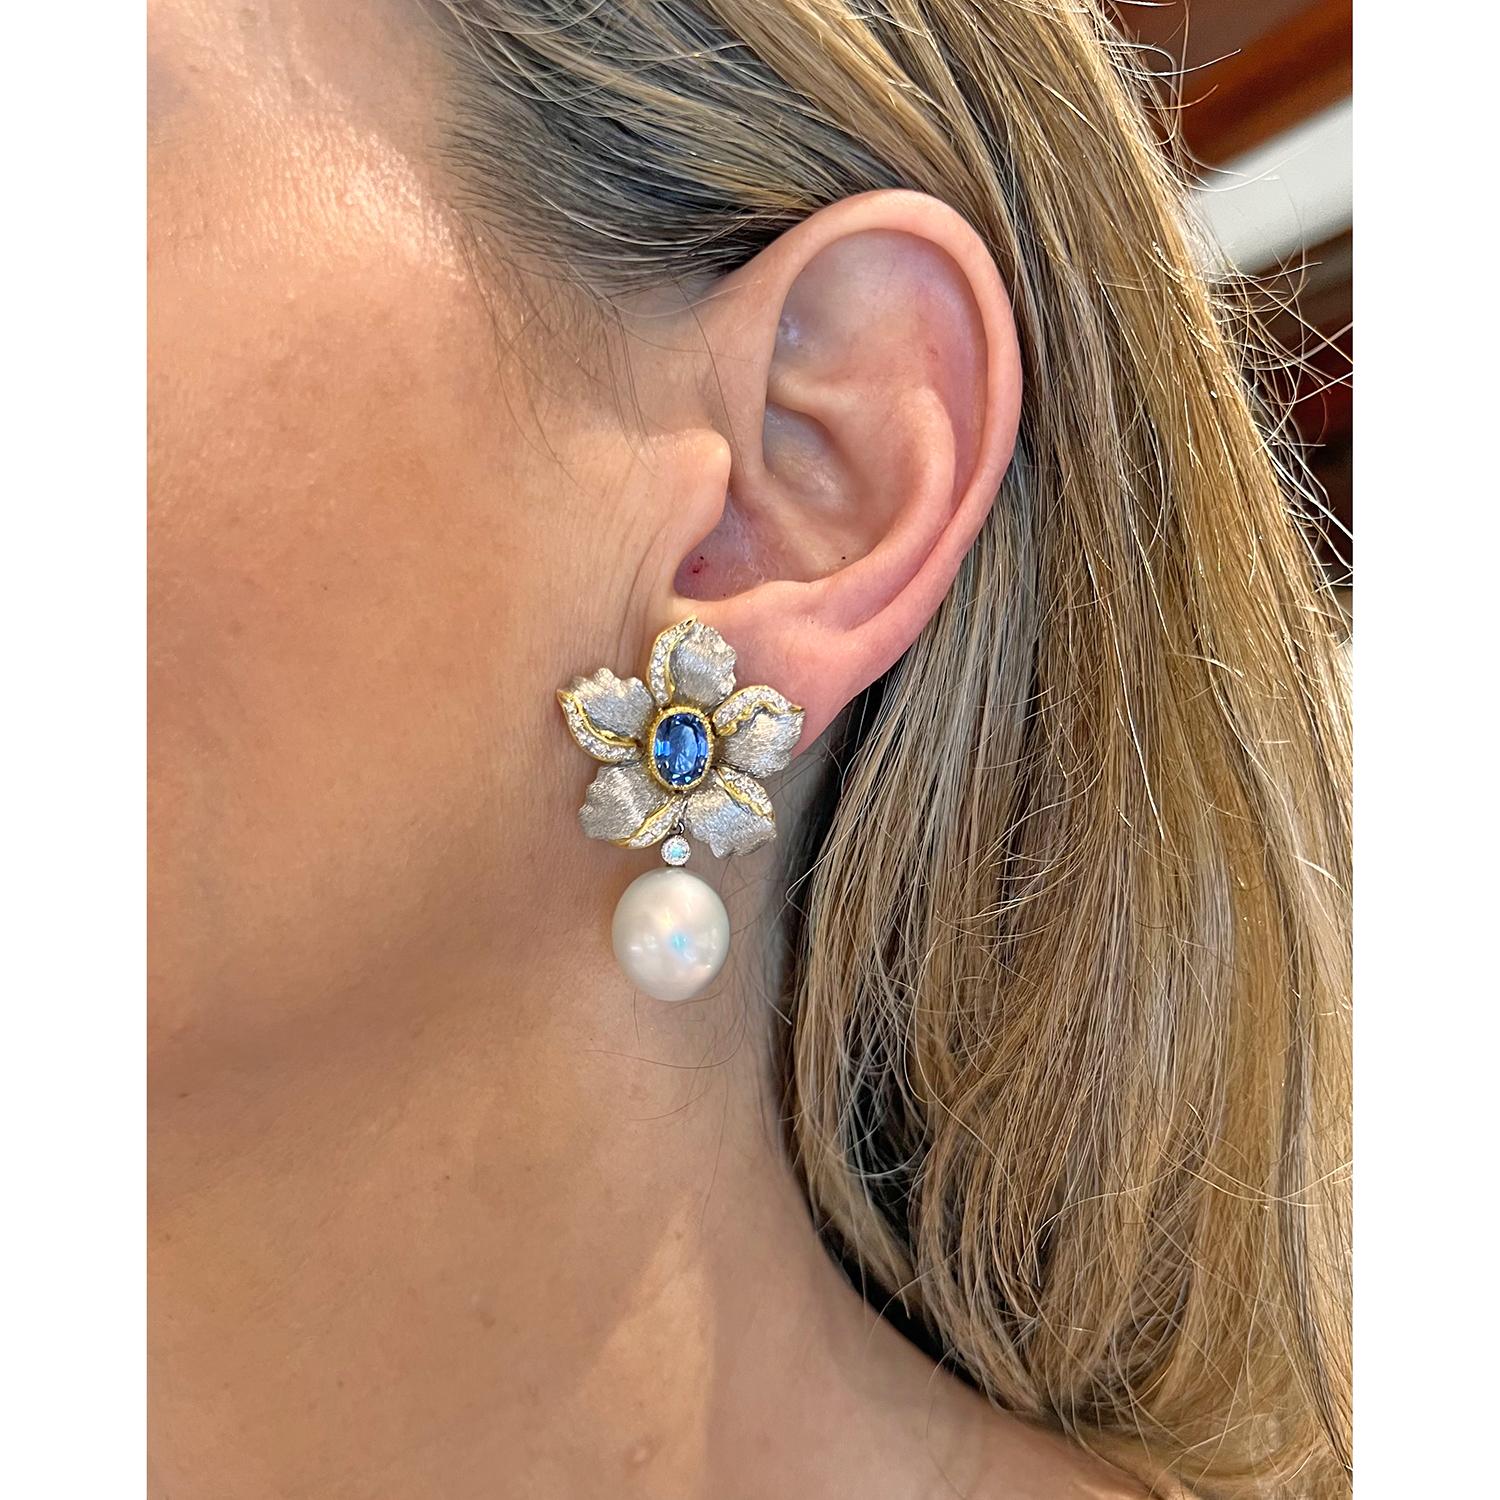 Flower earrings in brushed 18k white gold, each centering a larger oval-shaped sapphire bezel-set in 18k yellow gold with round brilliant-cut diamond accents and suspending a removable pearl drop with round brilliant-cut diamond surmount.  Two